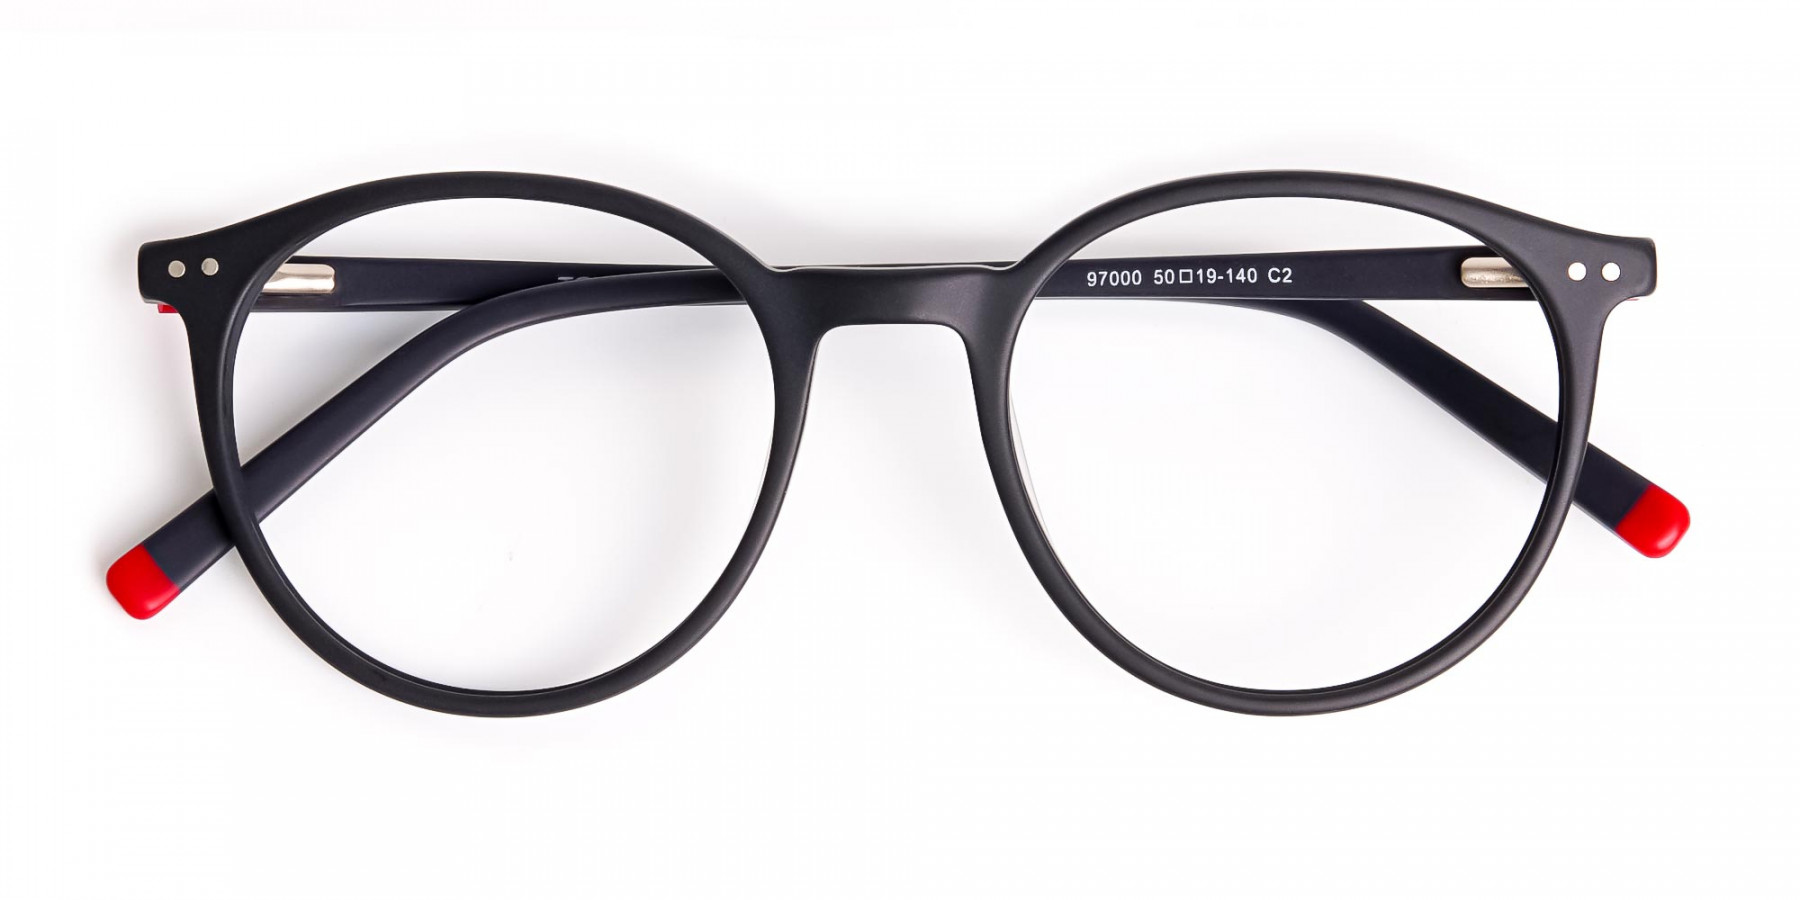 matte-black-and-red-round-glasses-frames-1